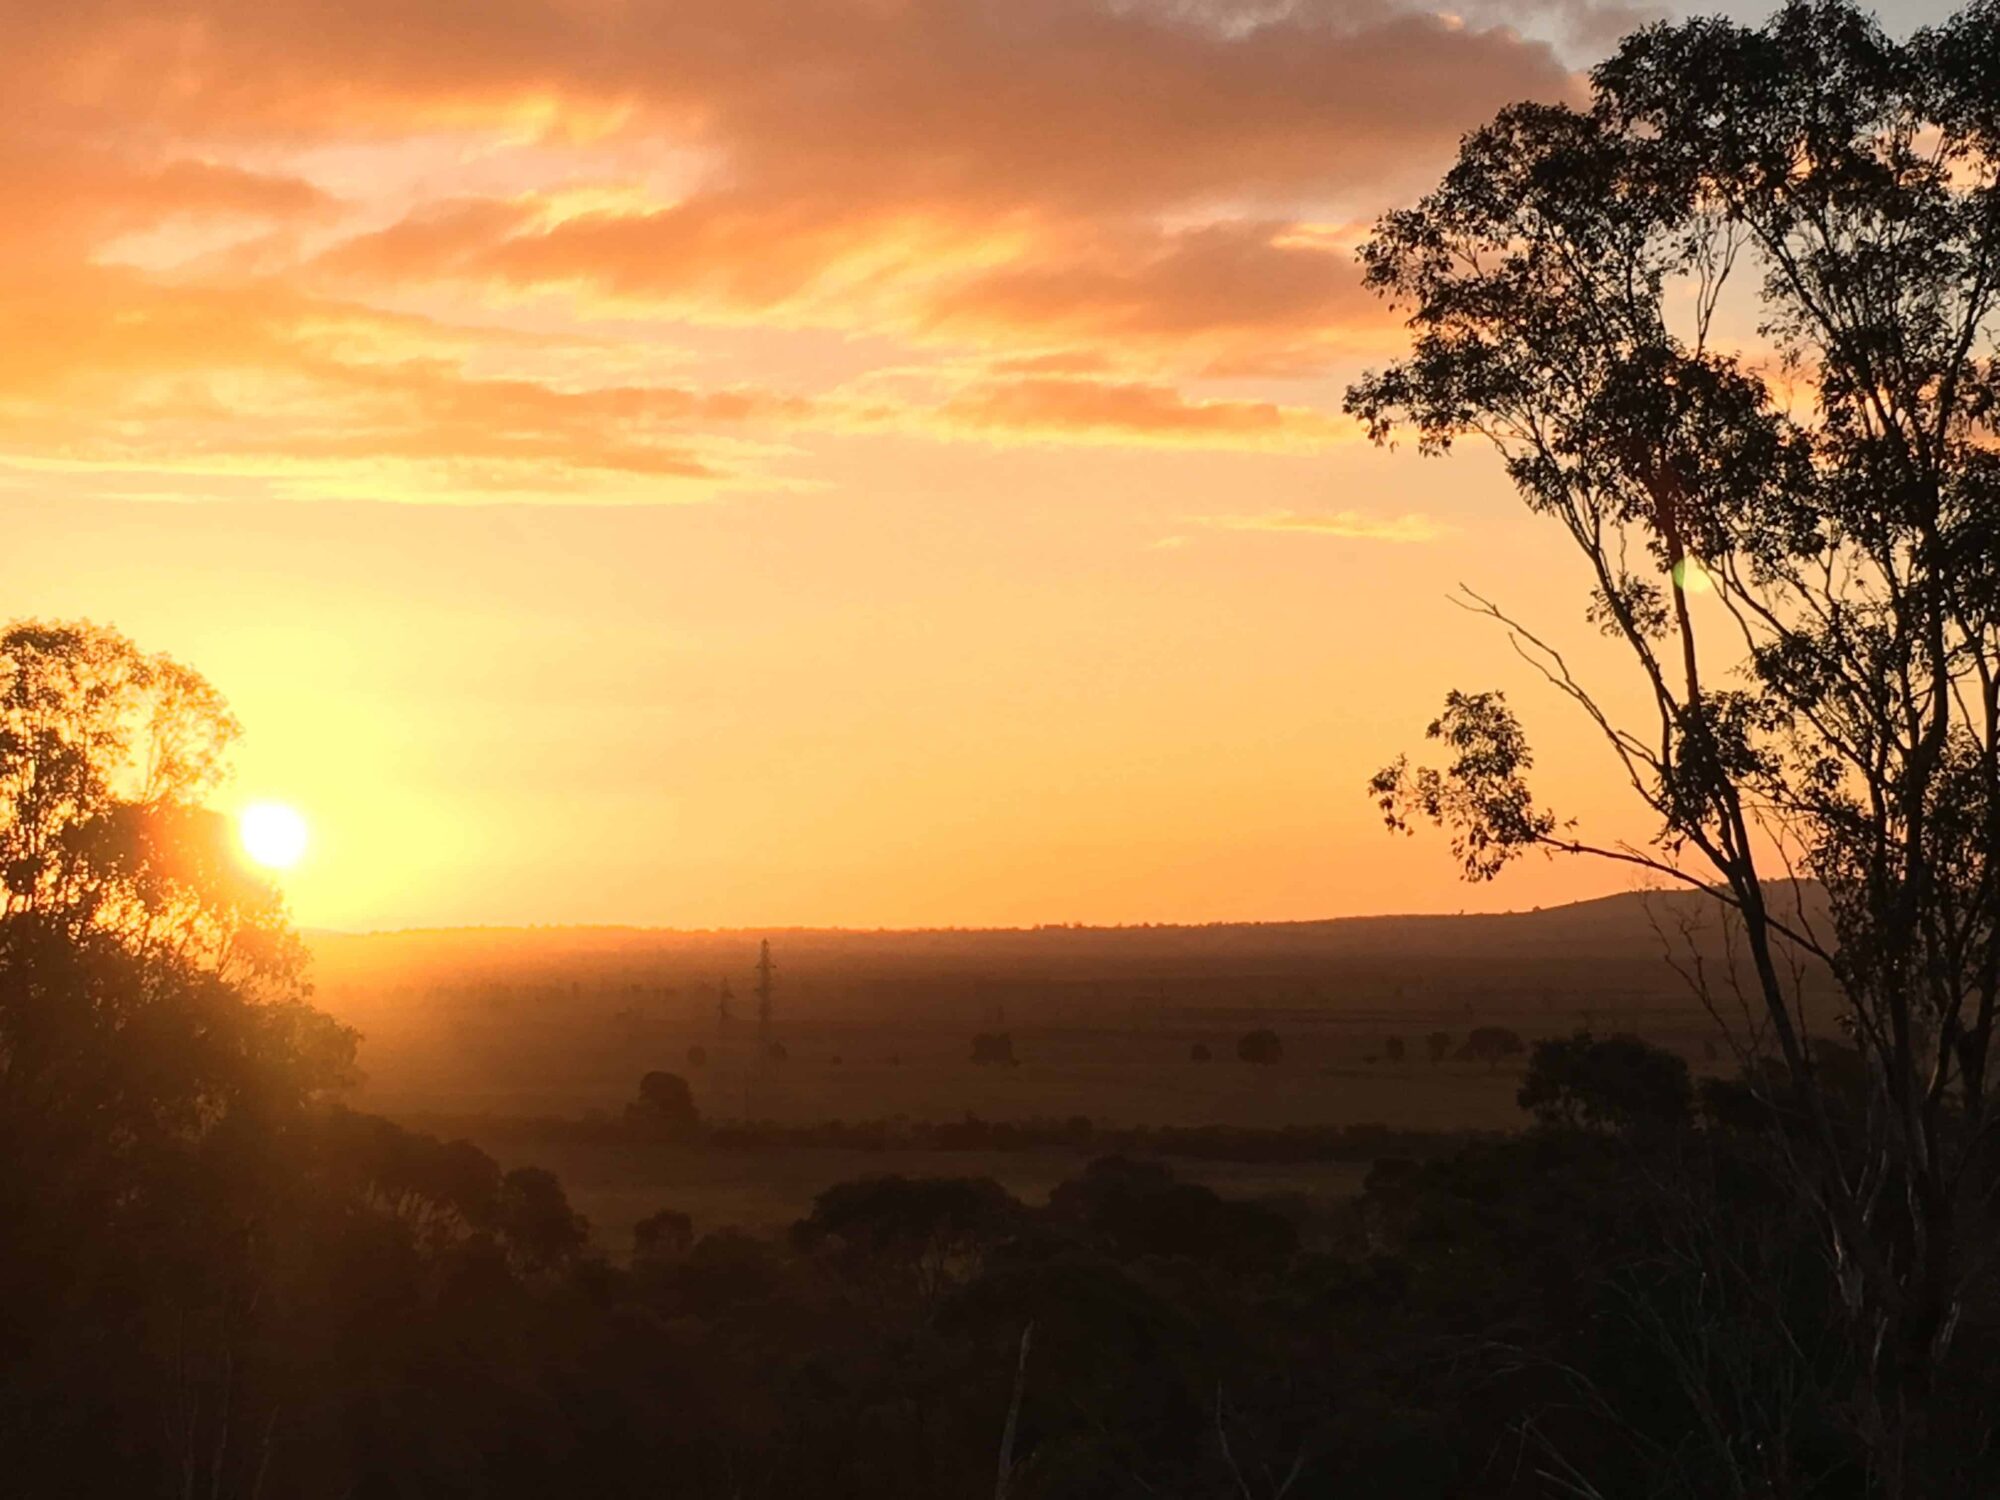 The orange glow of sunset at Days lookout, Winton